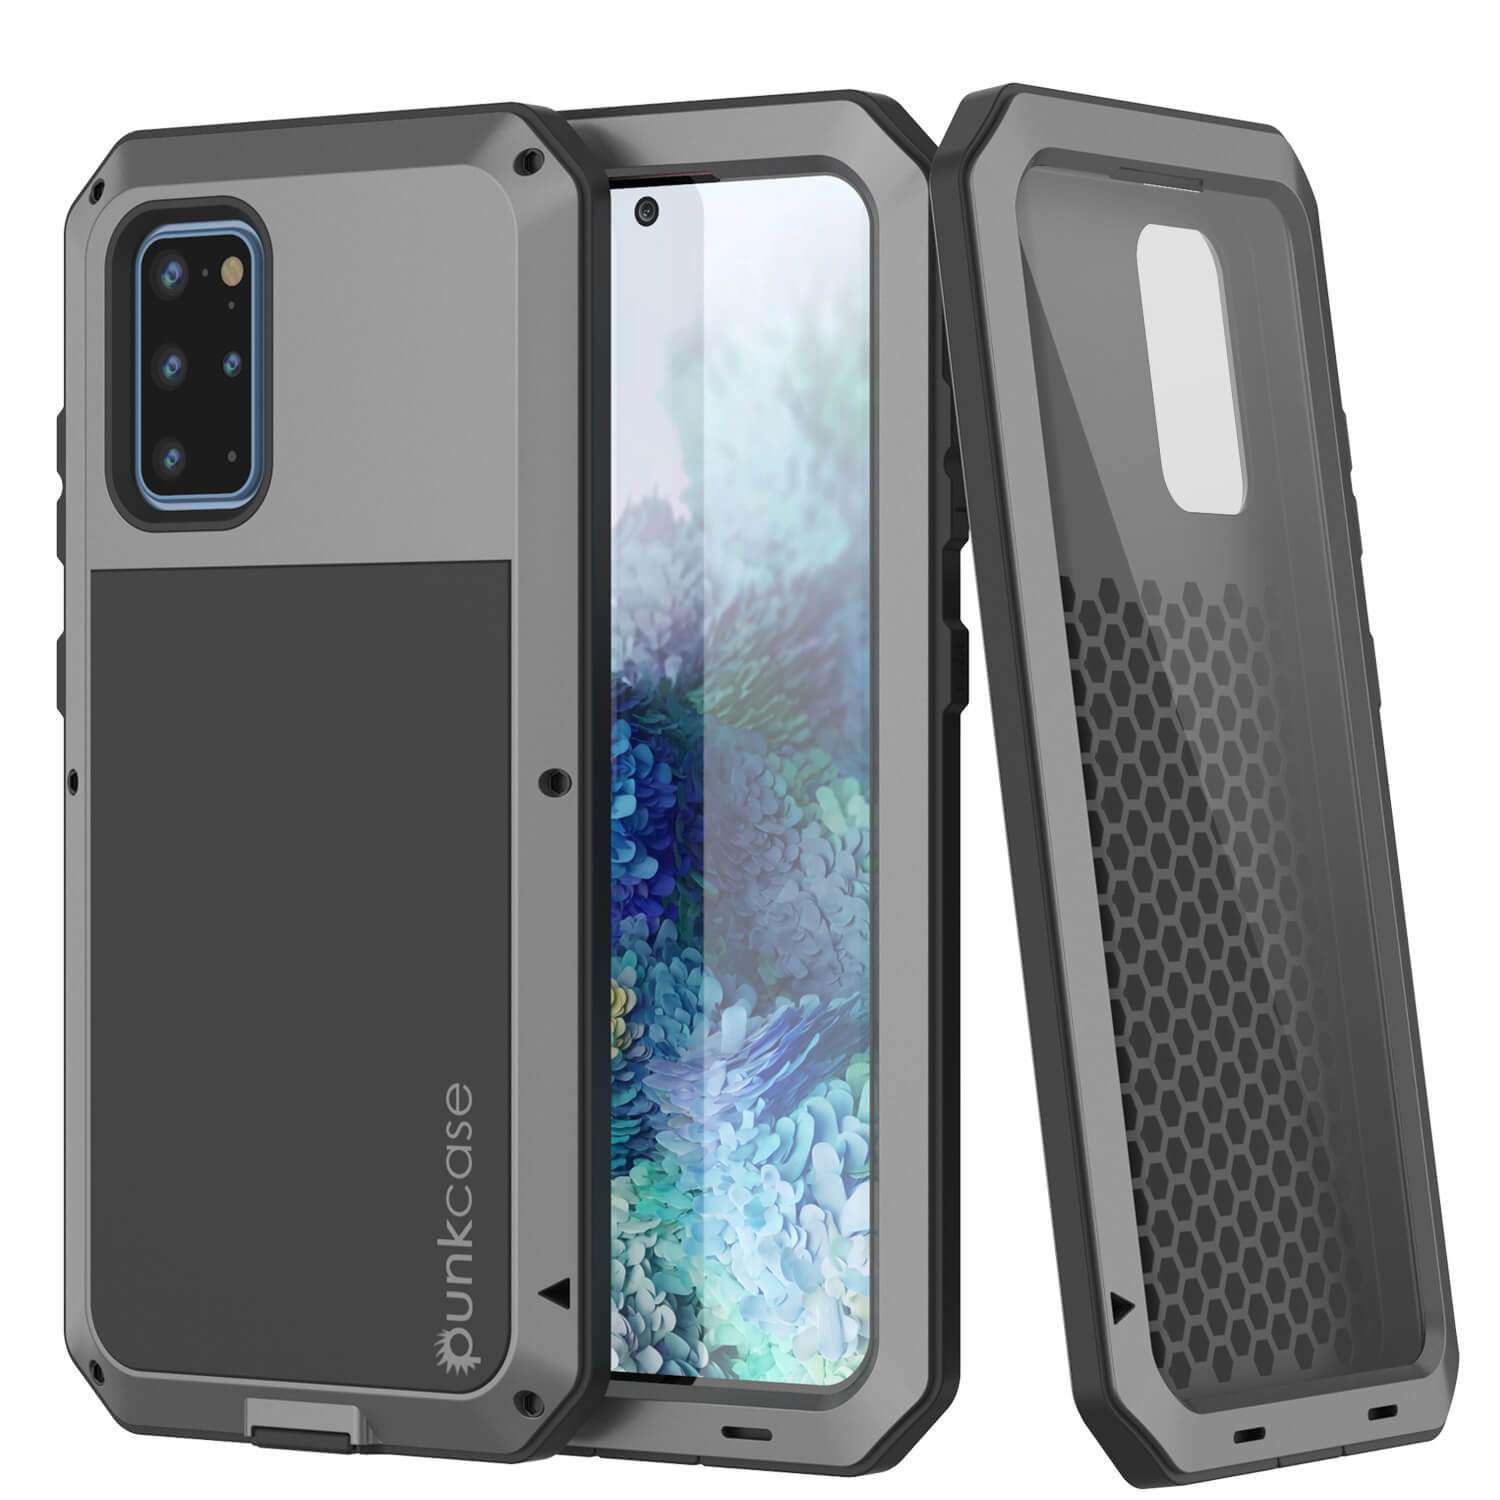 Galaxy s20+ Plus Metal Case, Heavy Duty Military Grade Rugged Armor Cover [Silver]